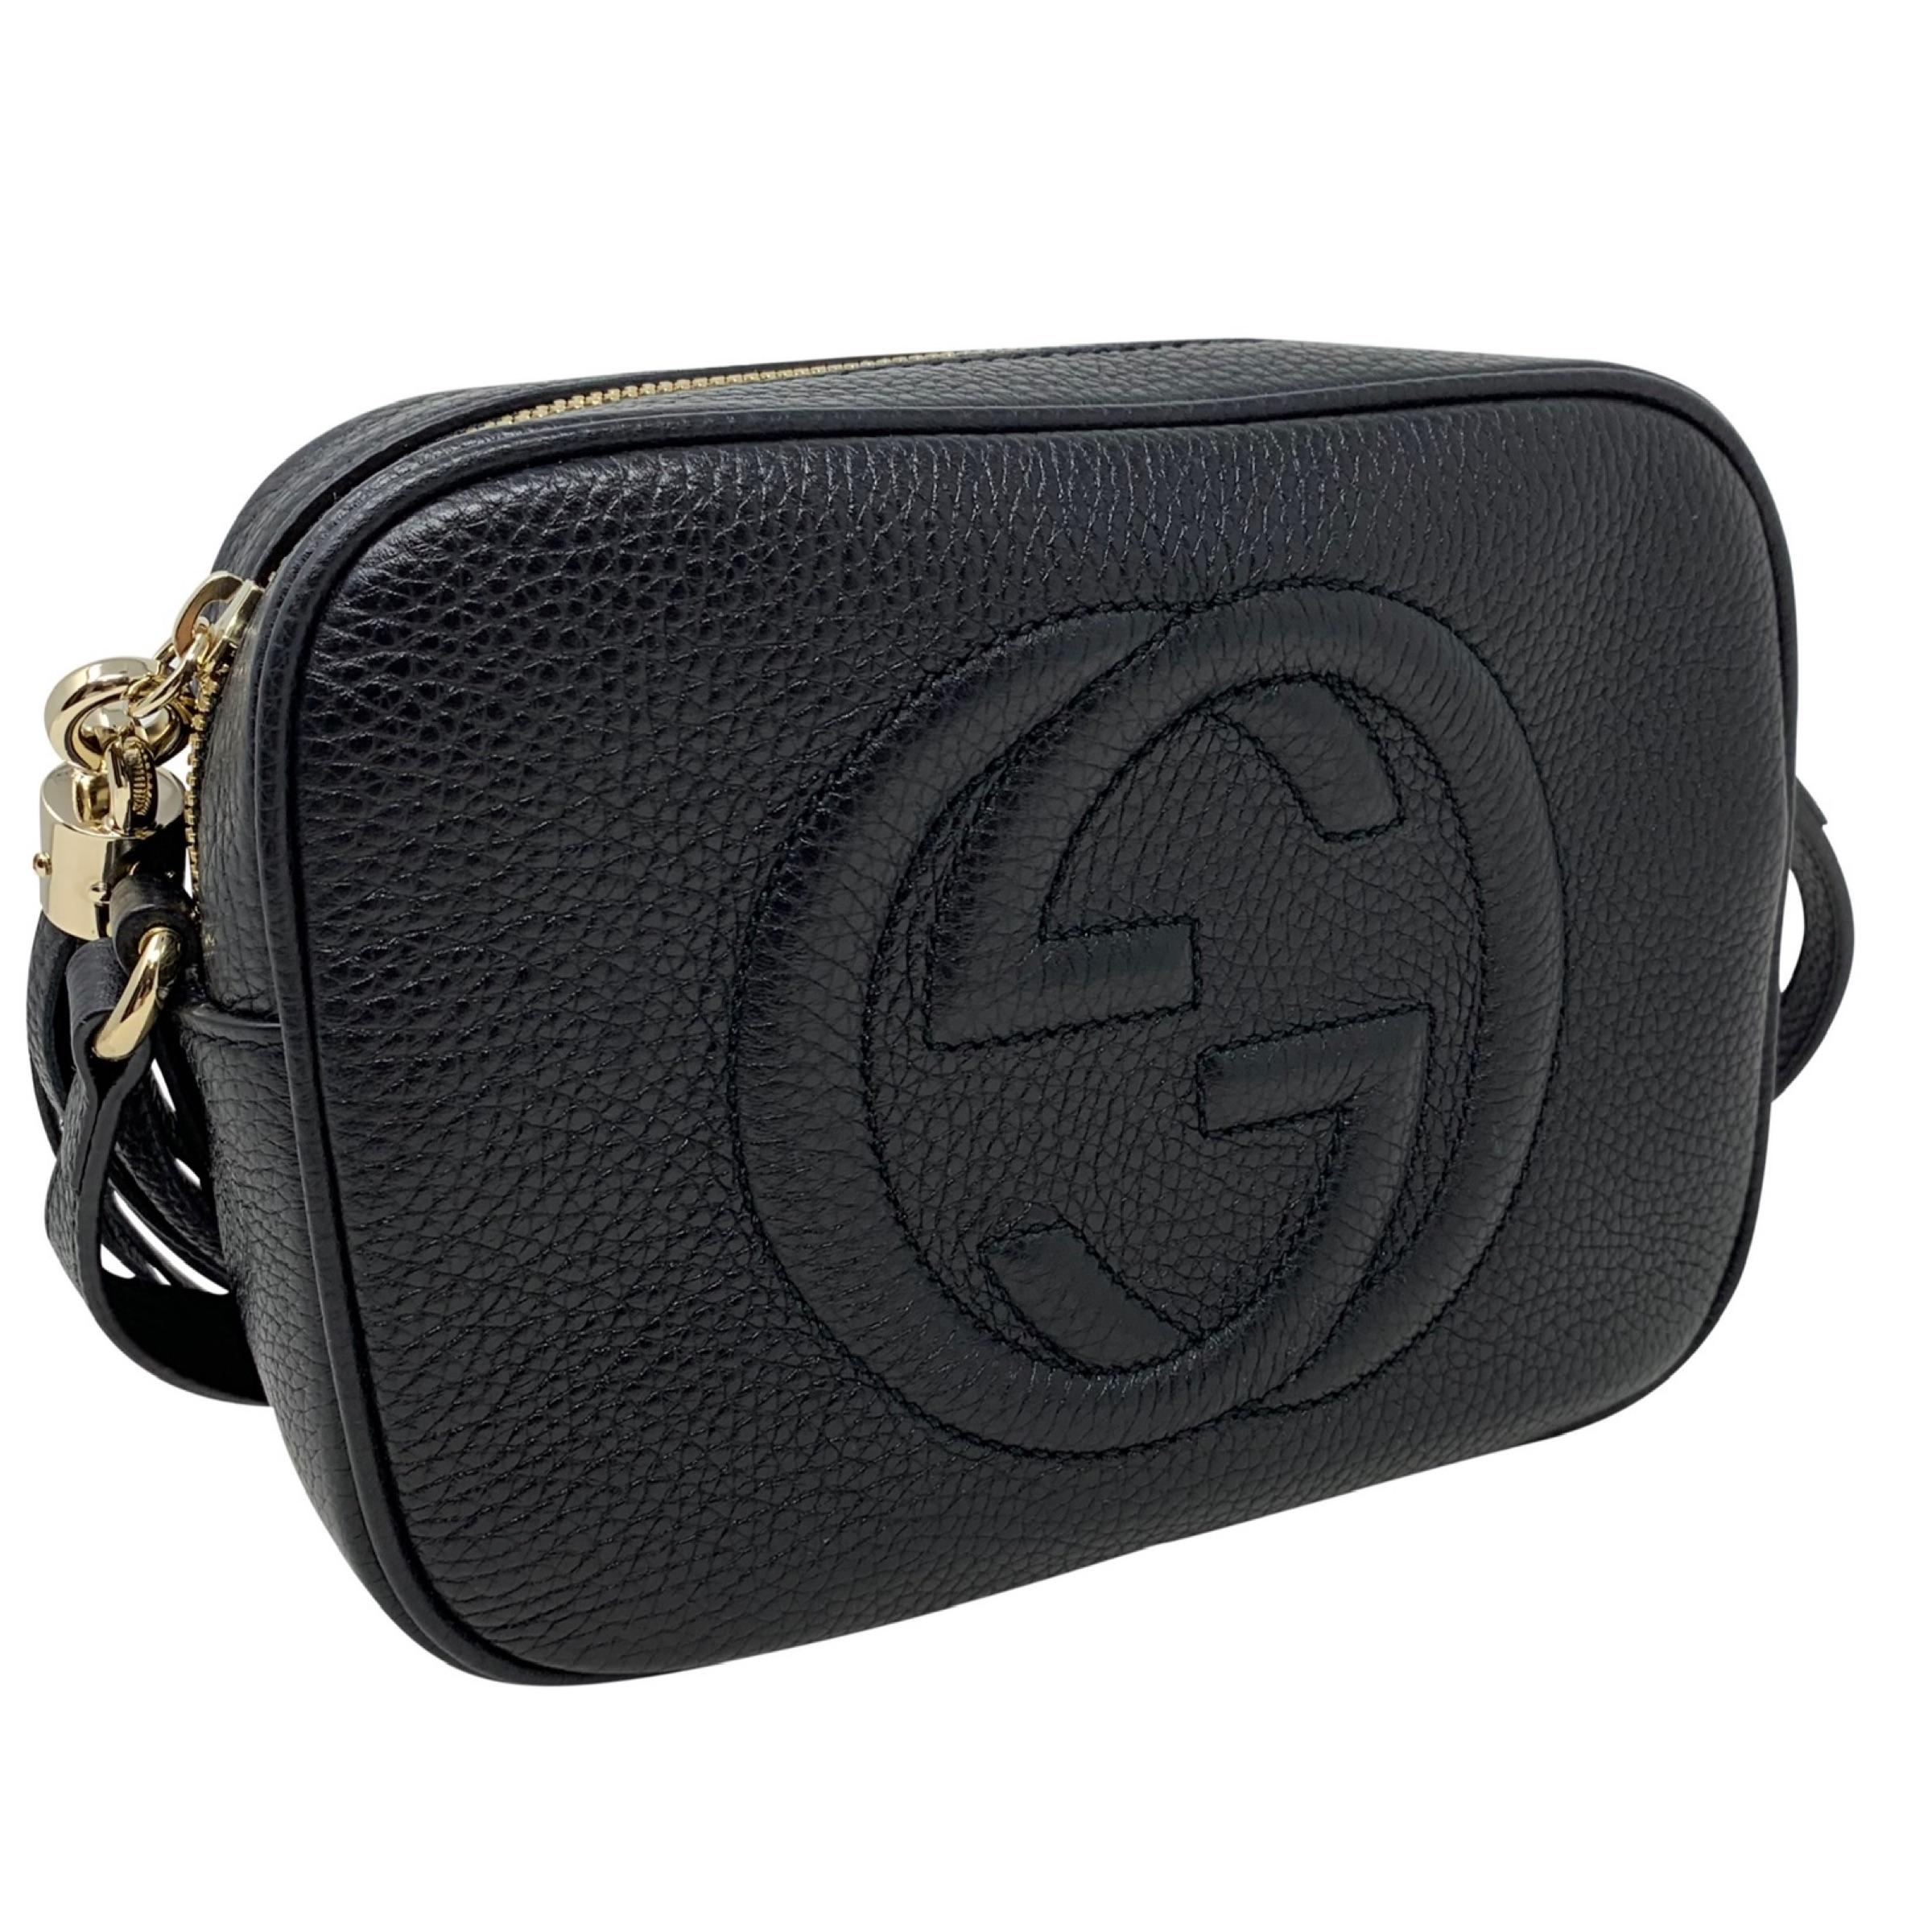 NEW Gucci Black Small Soho Disco Leather Crossbody Bag For Sale 3